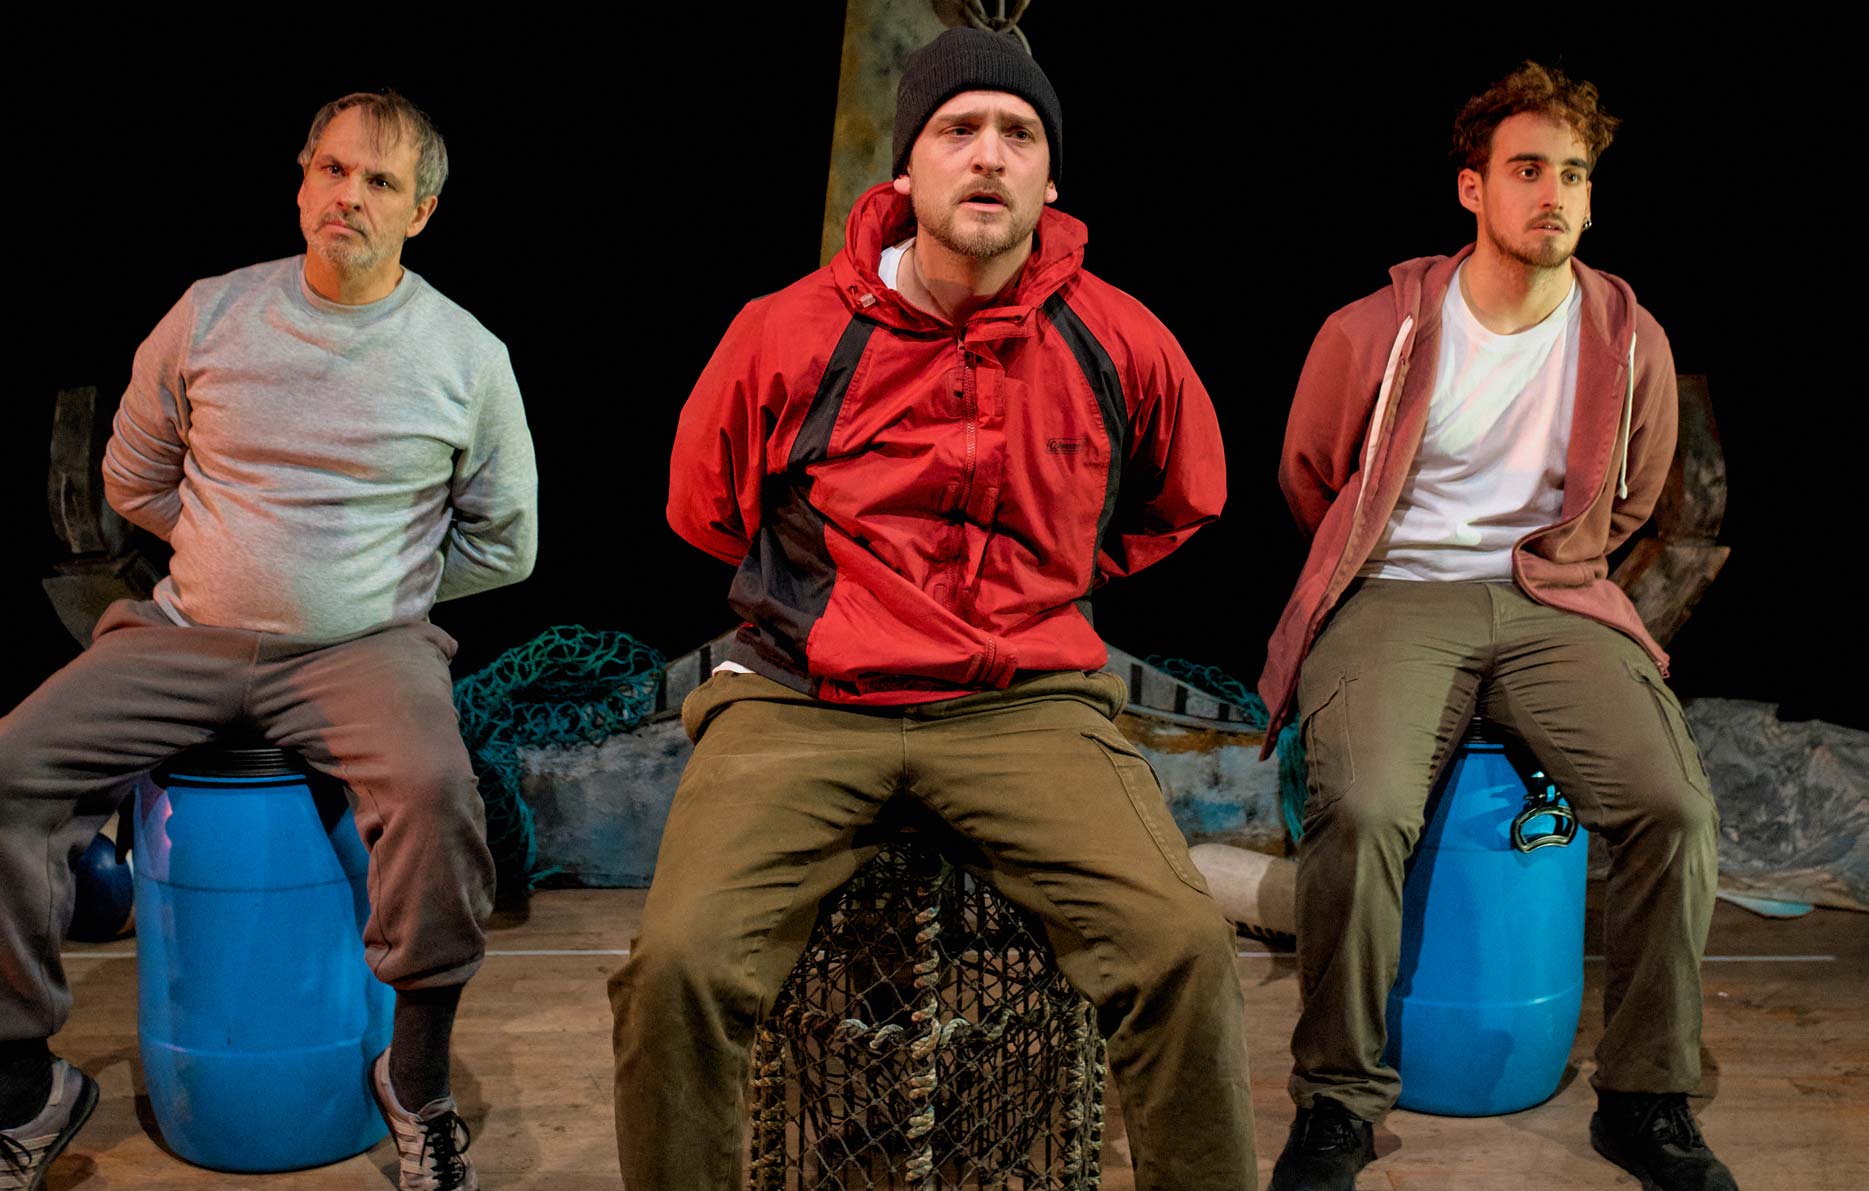 Three men sit on fishing pots and buoys with their hands behind their backs.